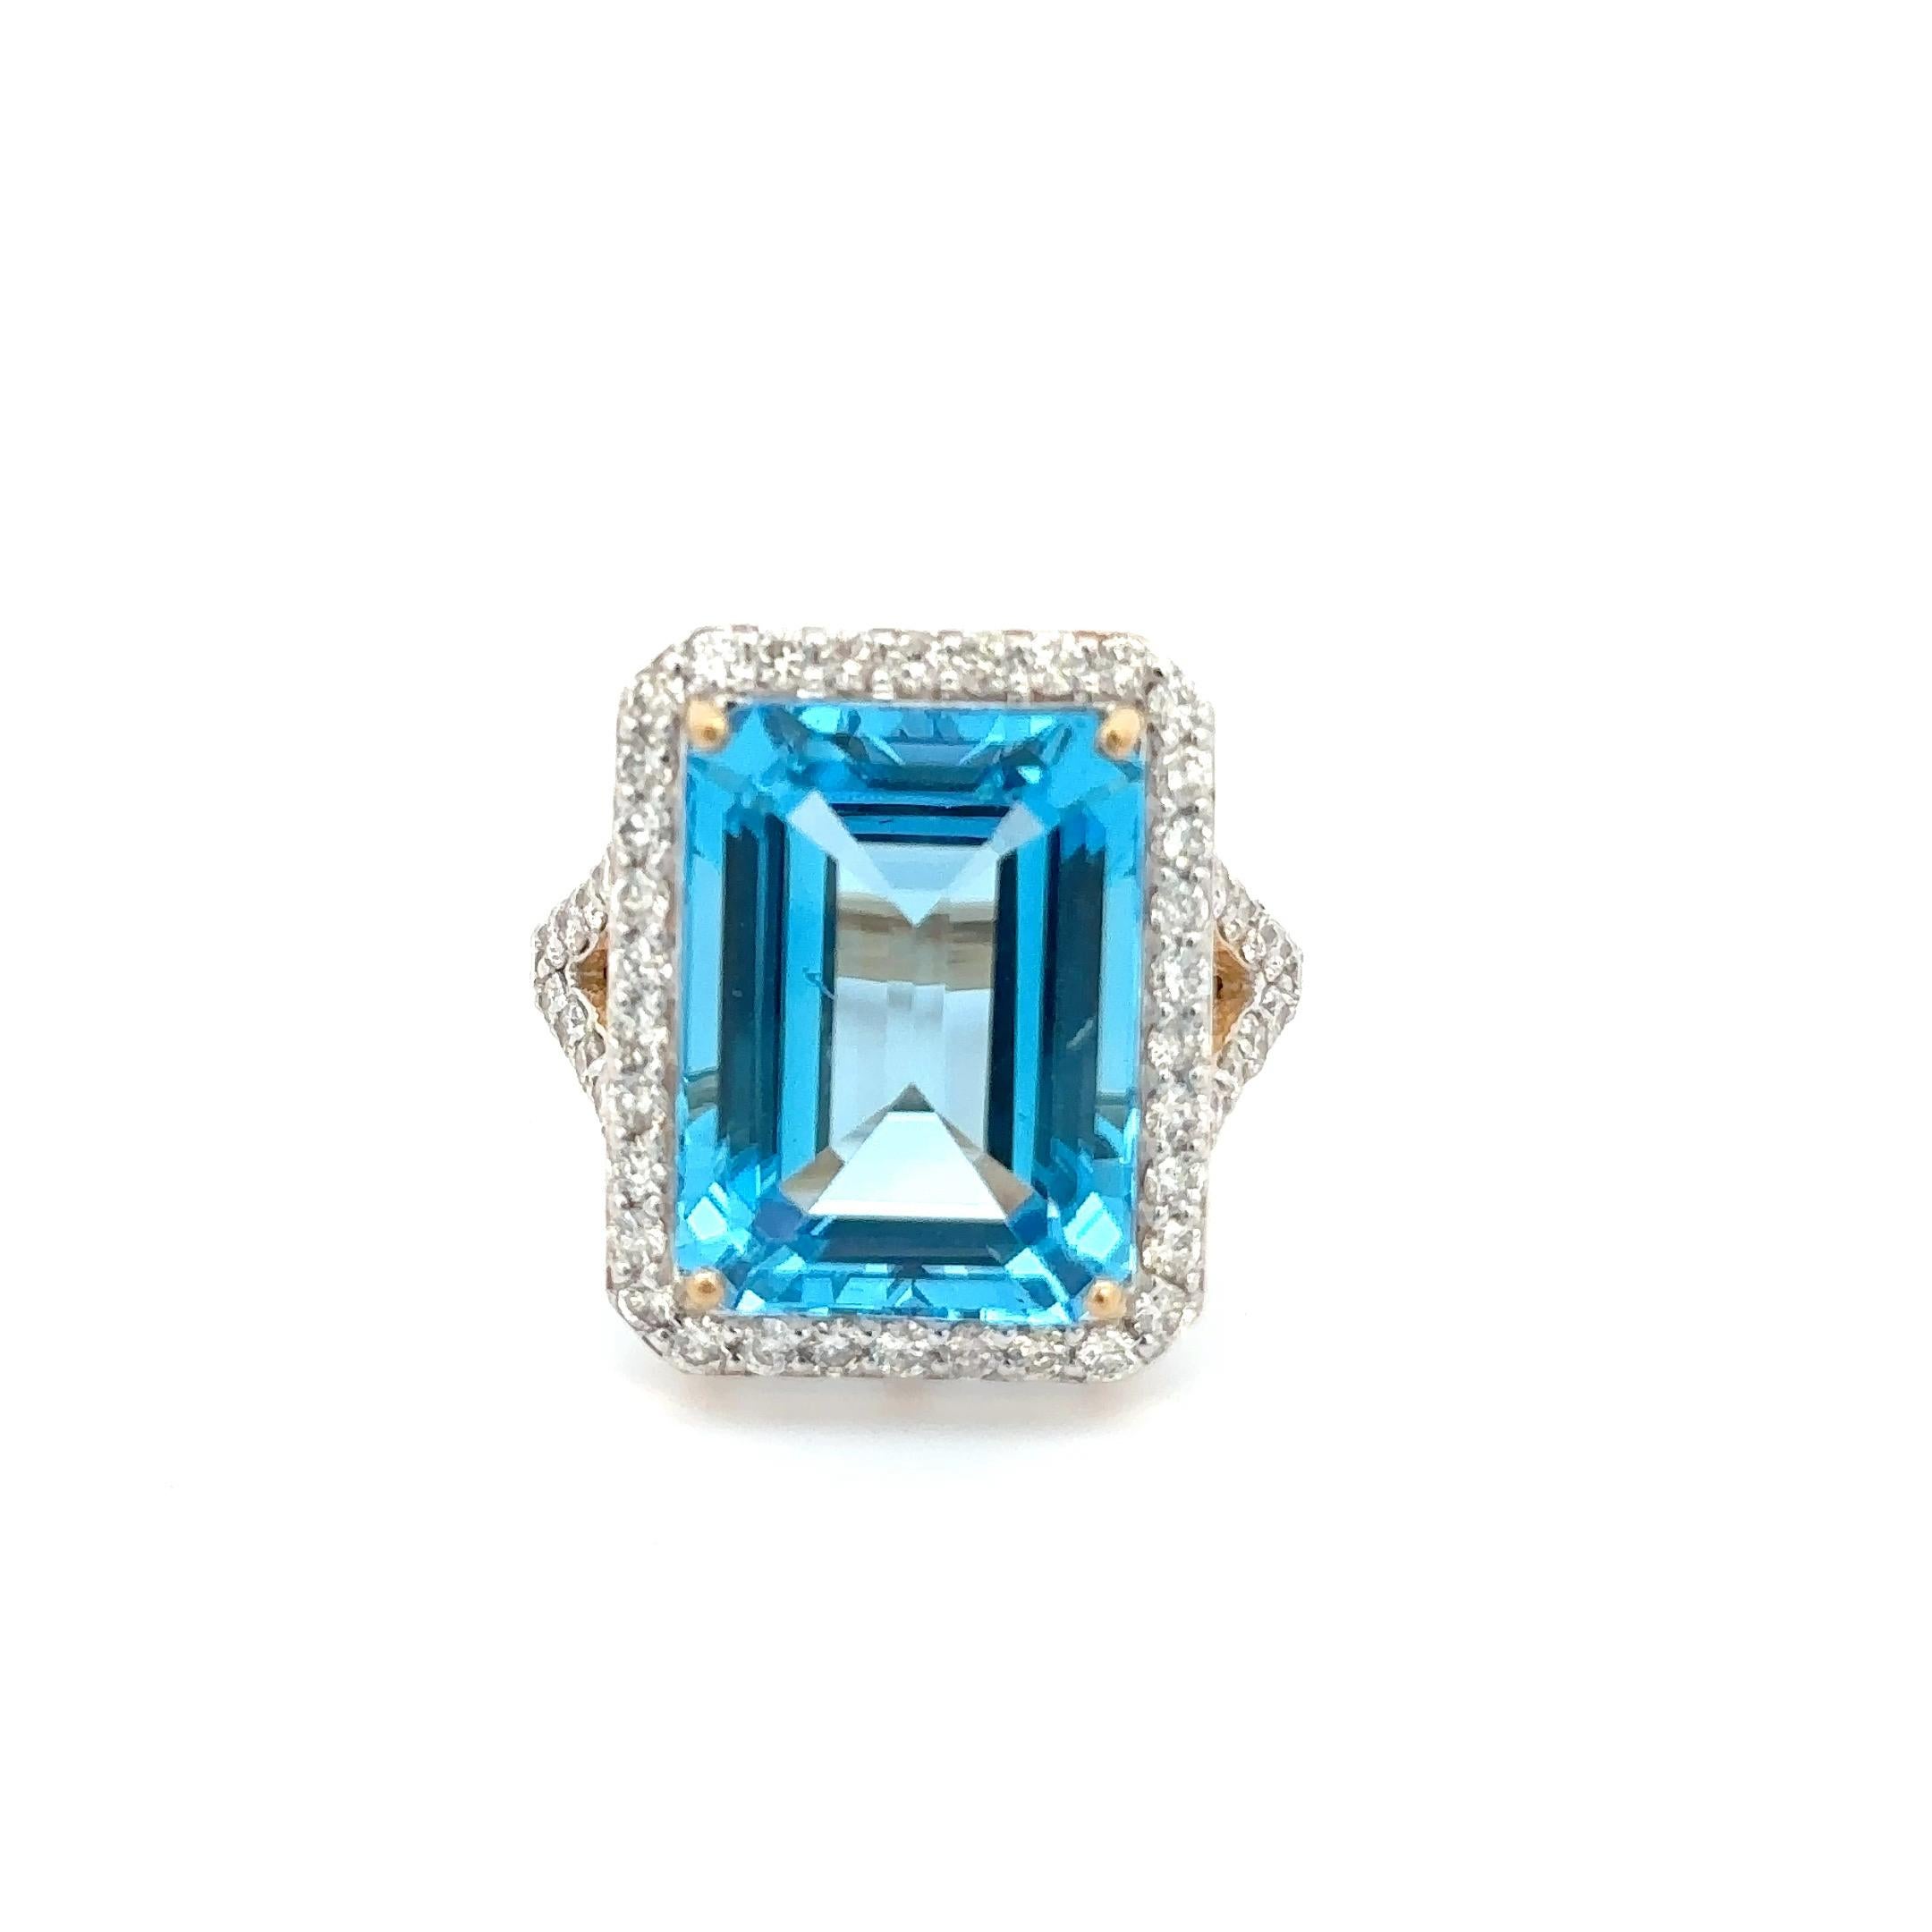 For Sale:  14k Solid Yellow Gold Large 15.41 CTW Blue Topaz Halo Diamond Cocktail Ring 2